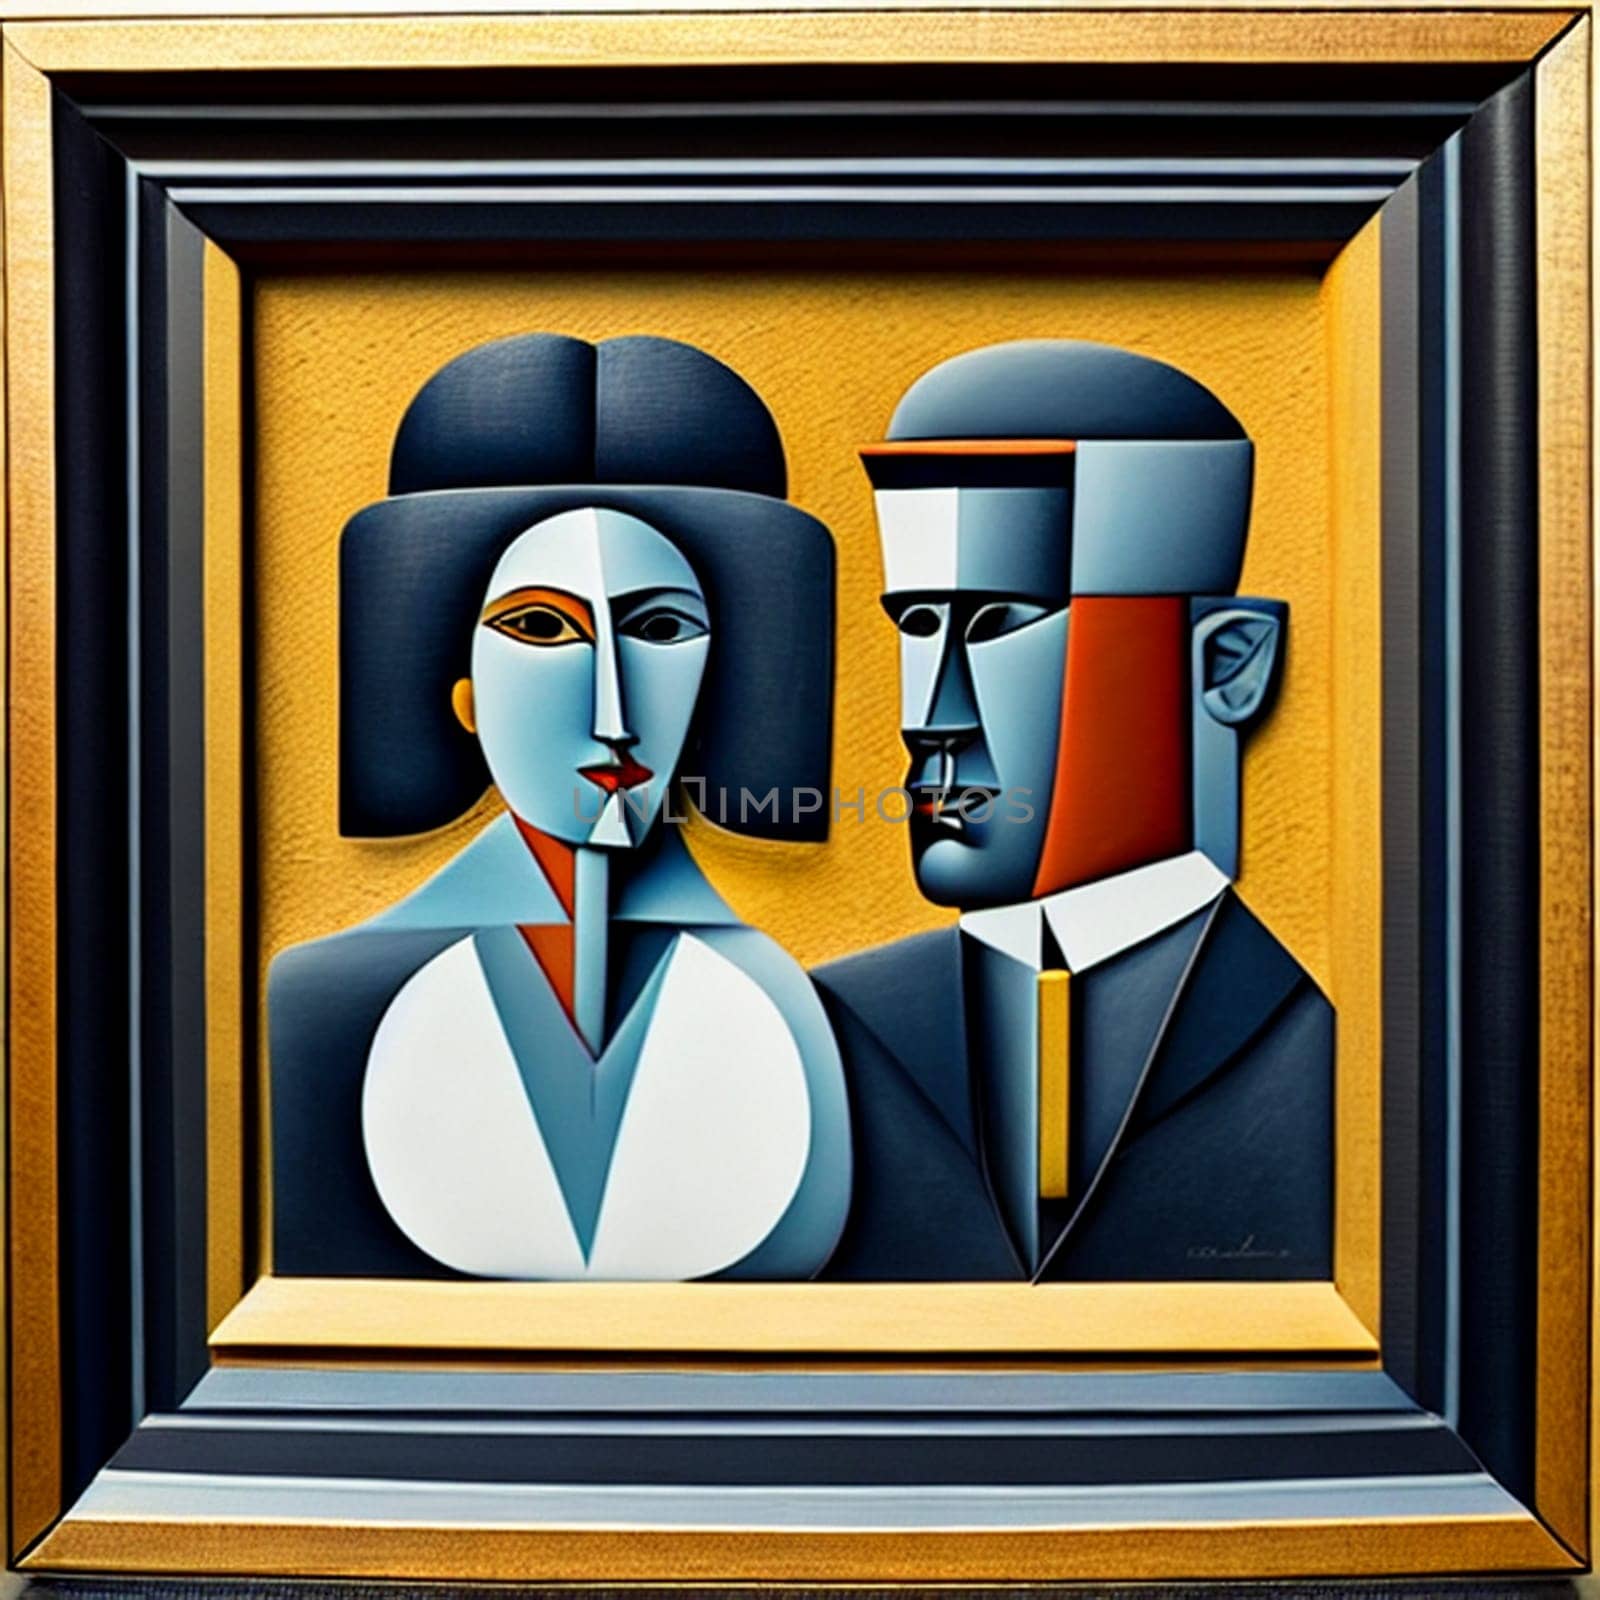 Framed Cubist Portrait of a Couple by Vailatese46